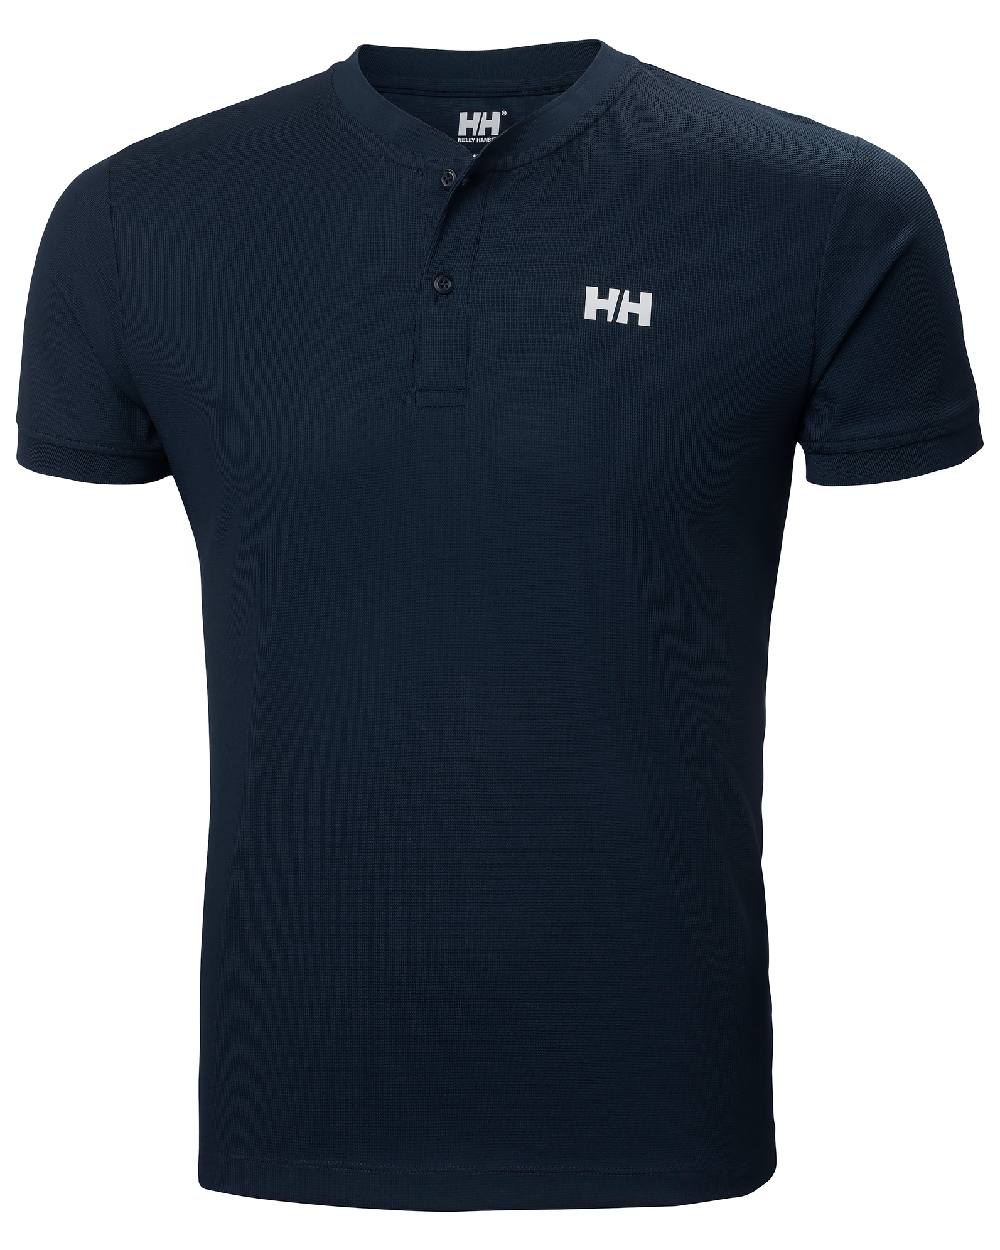 Navy Coloured Helly Hansen Mens HP Sun Protective Tops on white background 